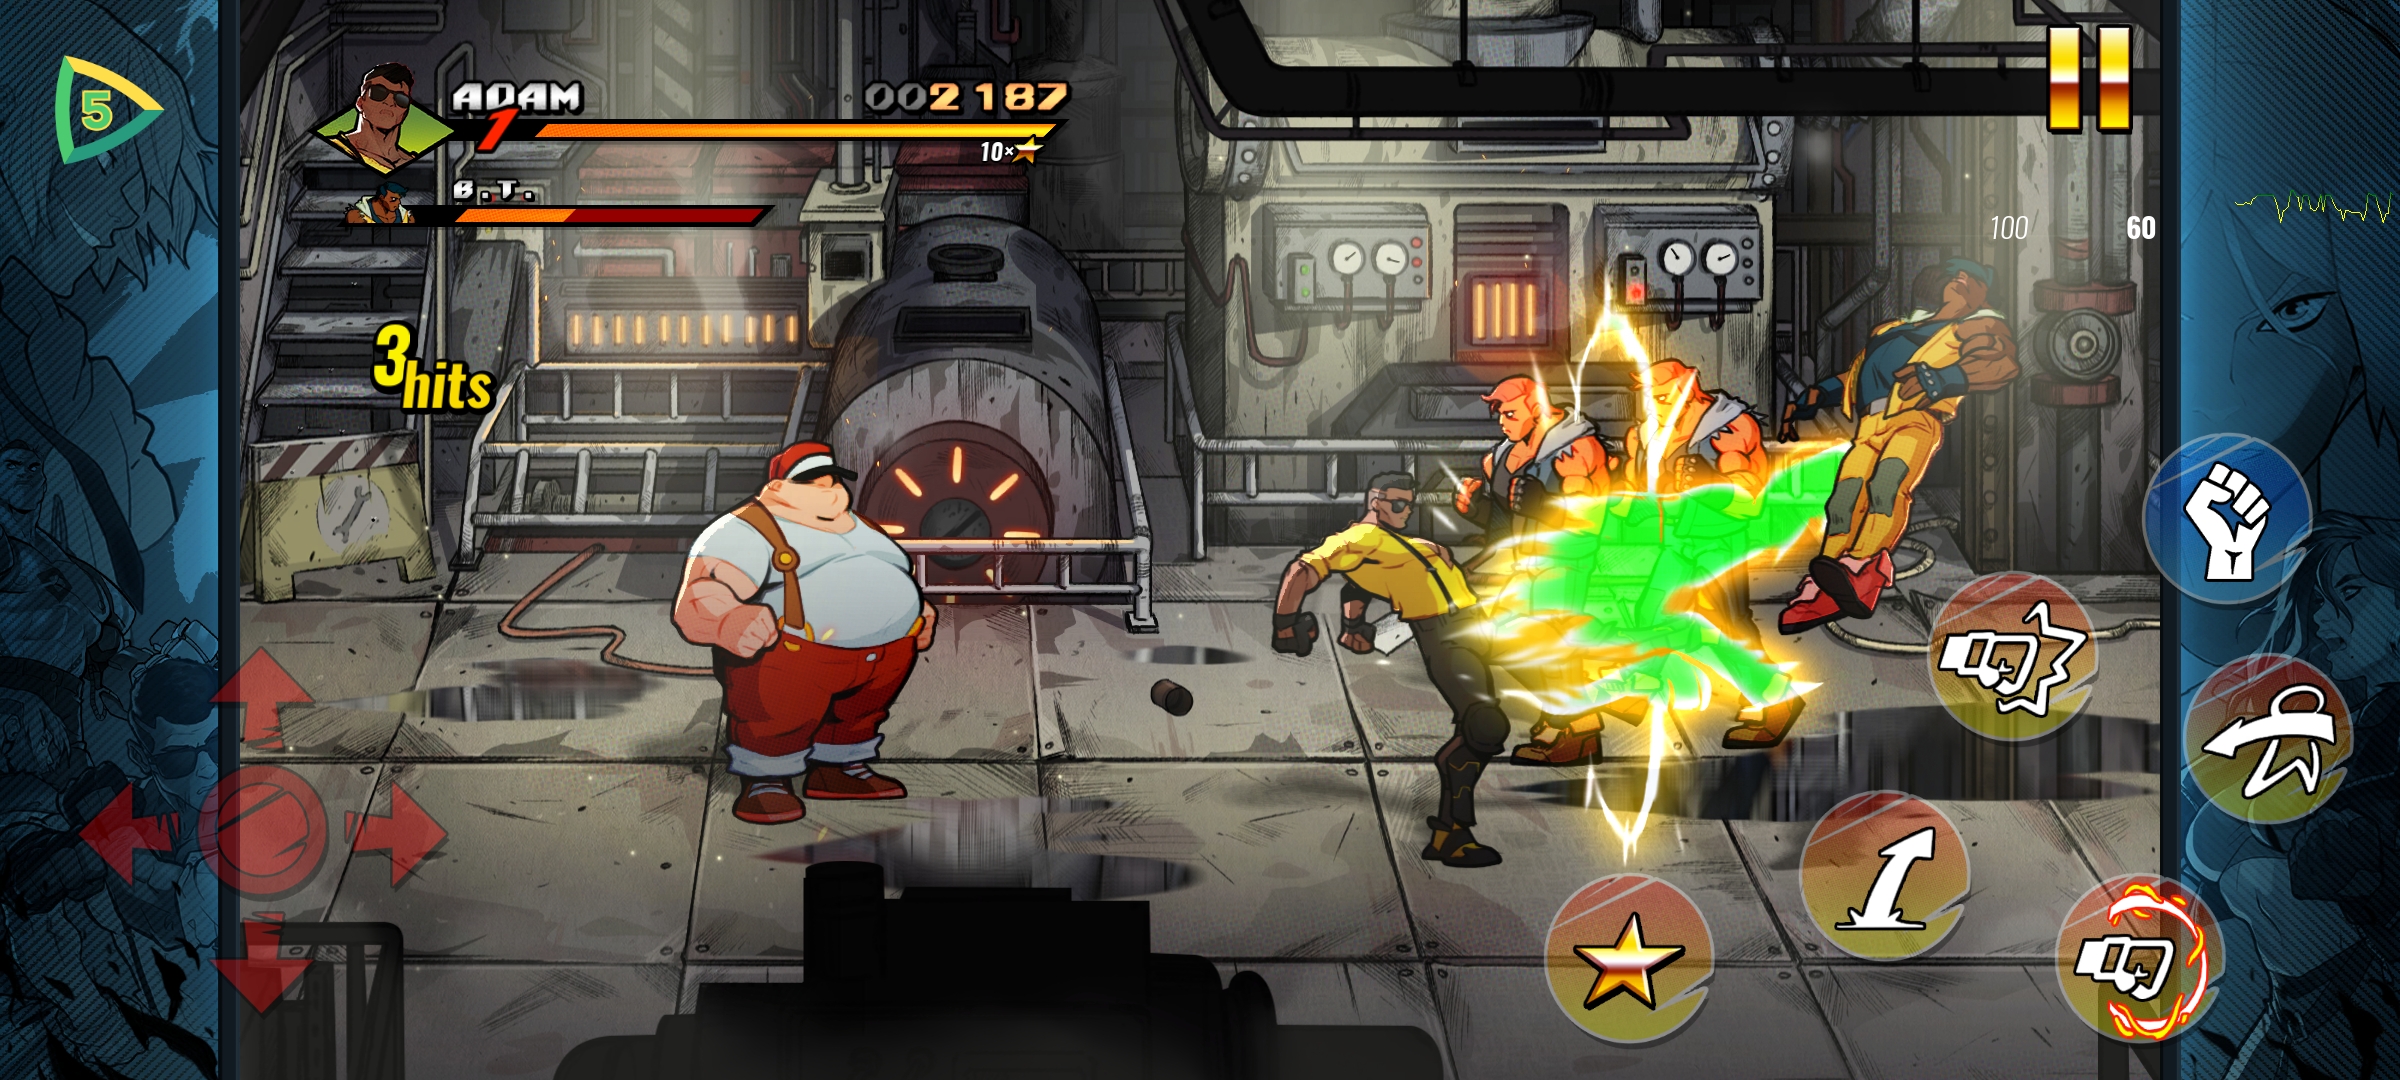 [Game Android] Streets of Rage 4